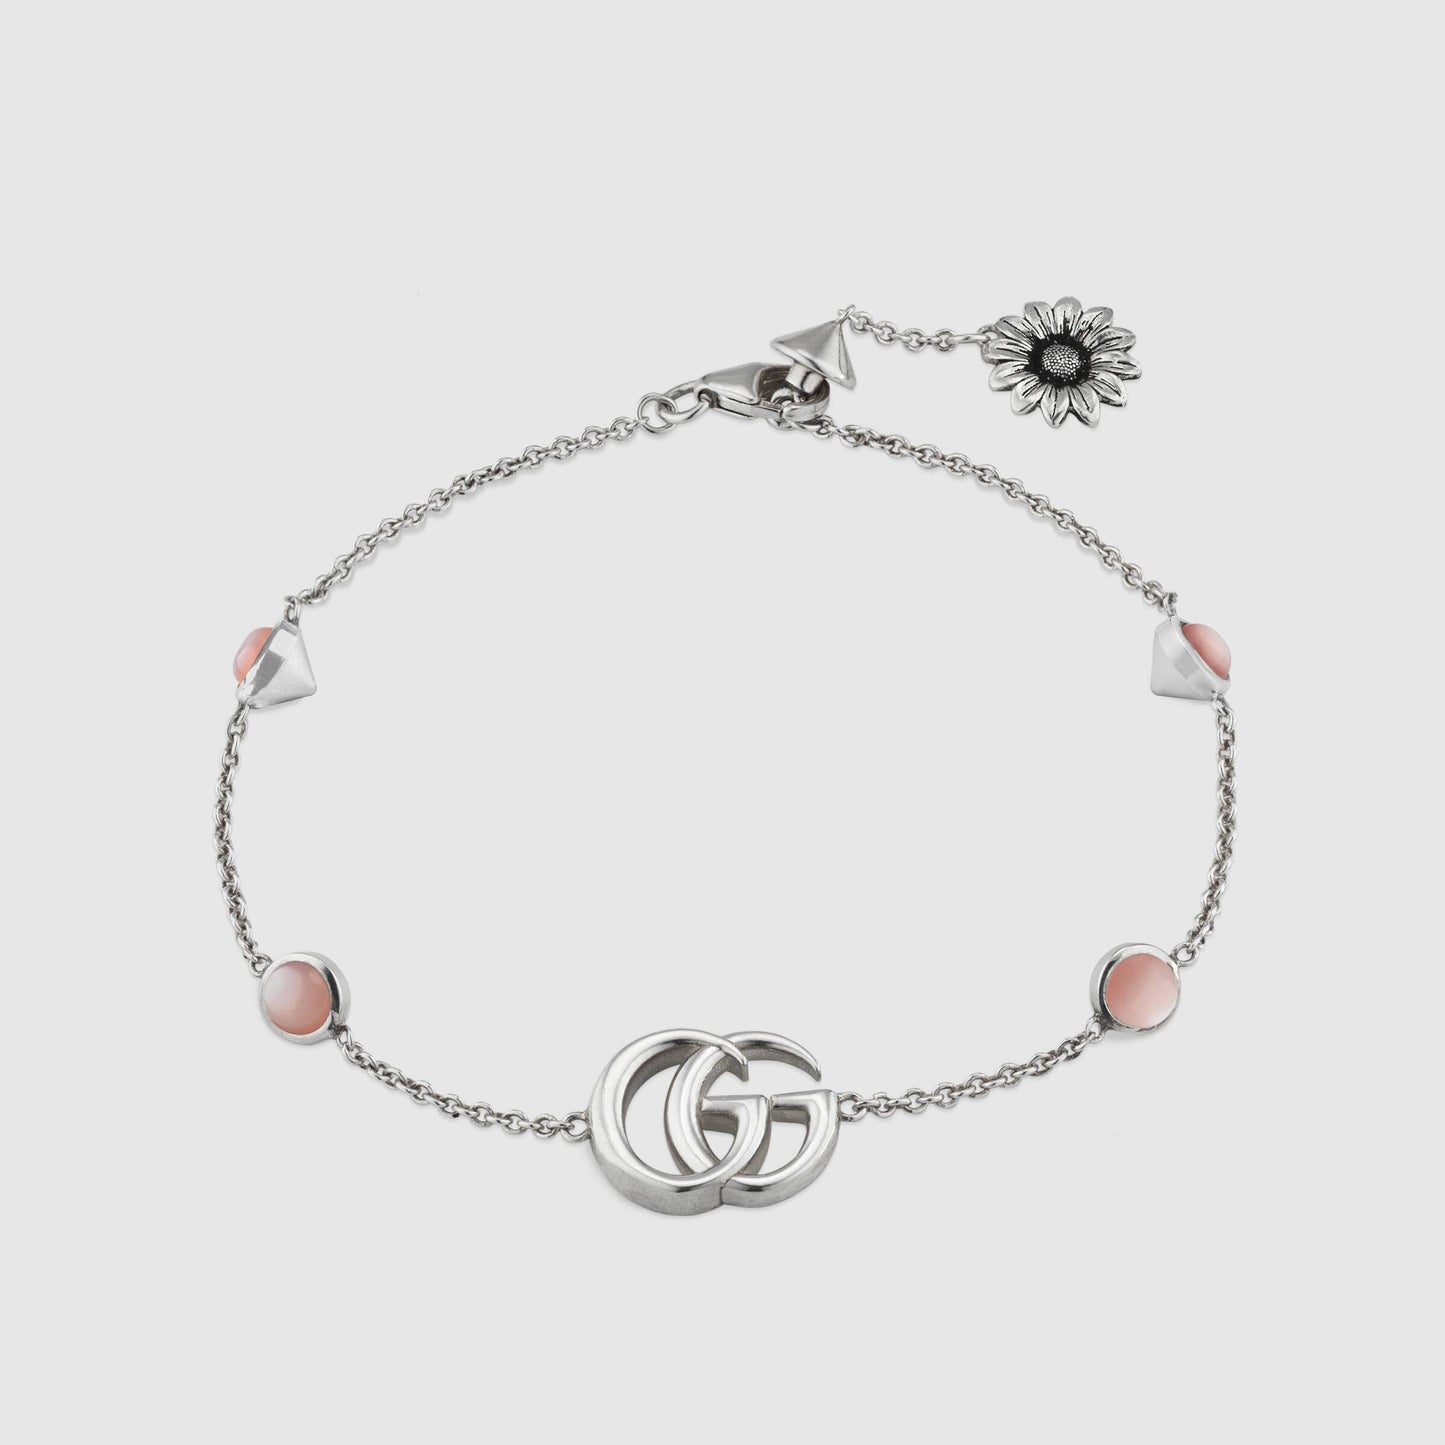 Double G Bracelet with Pink Mother of Pearl